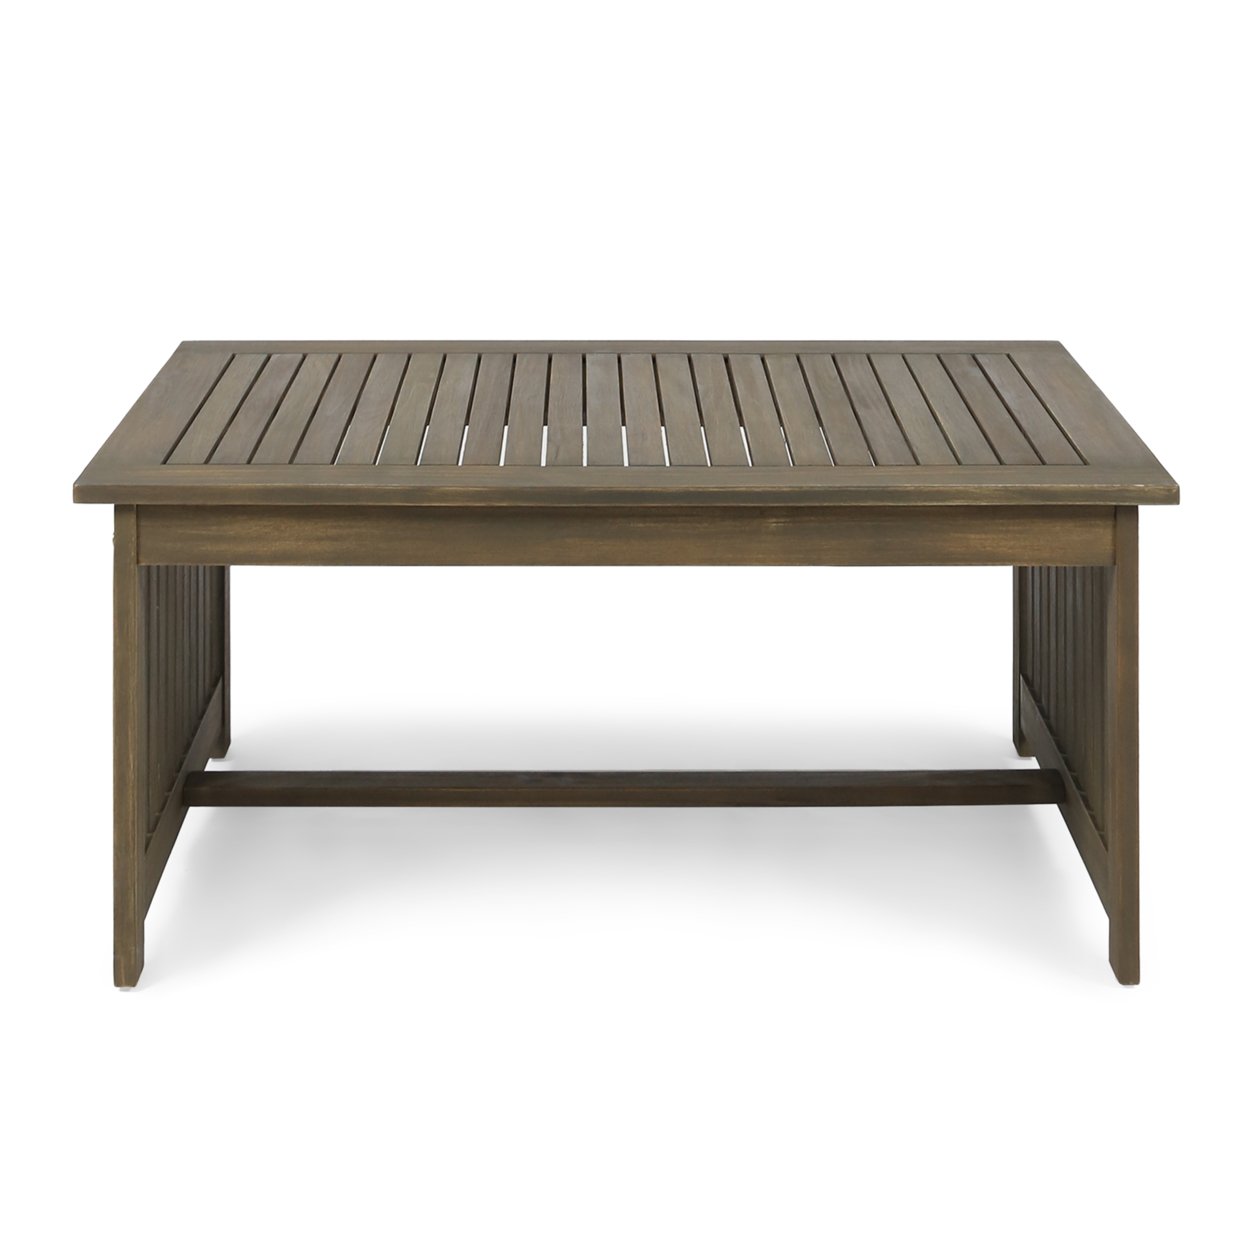 Grace Outdoor Acacia Wood Coffee Table - Gray Finish